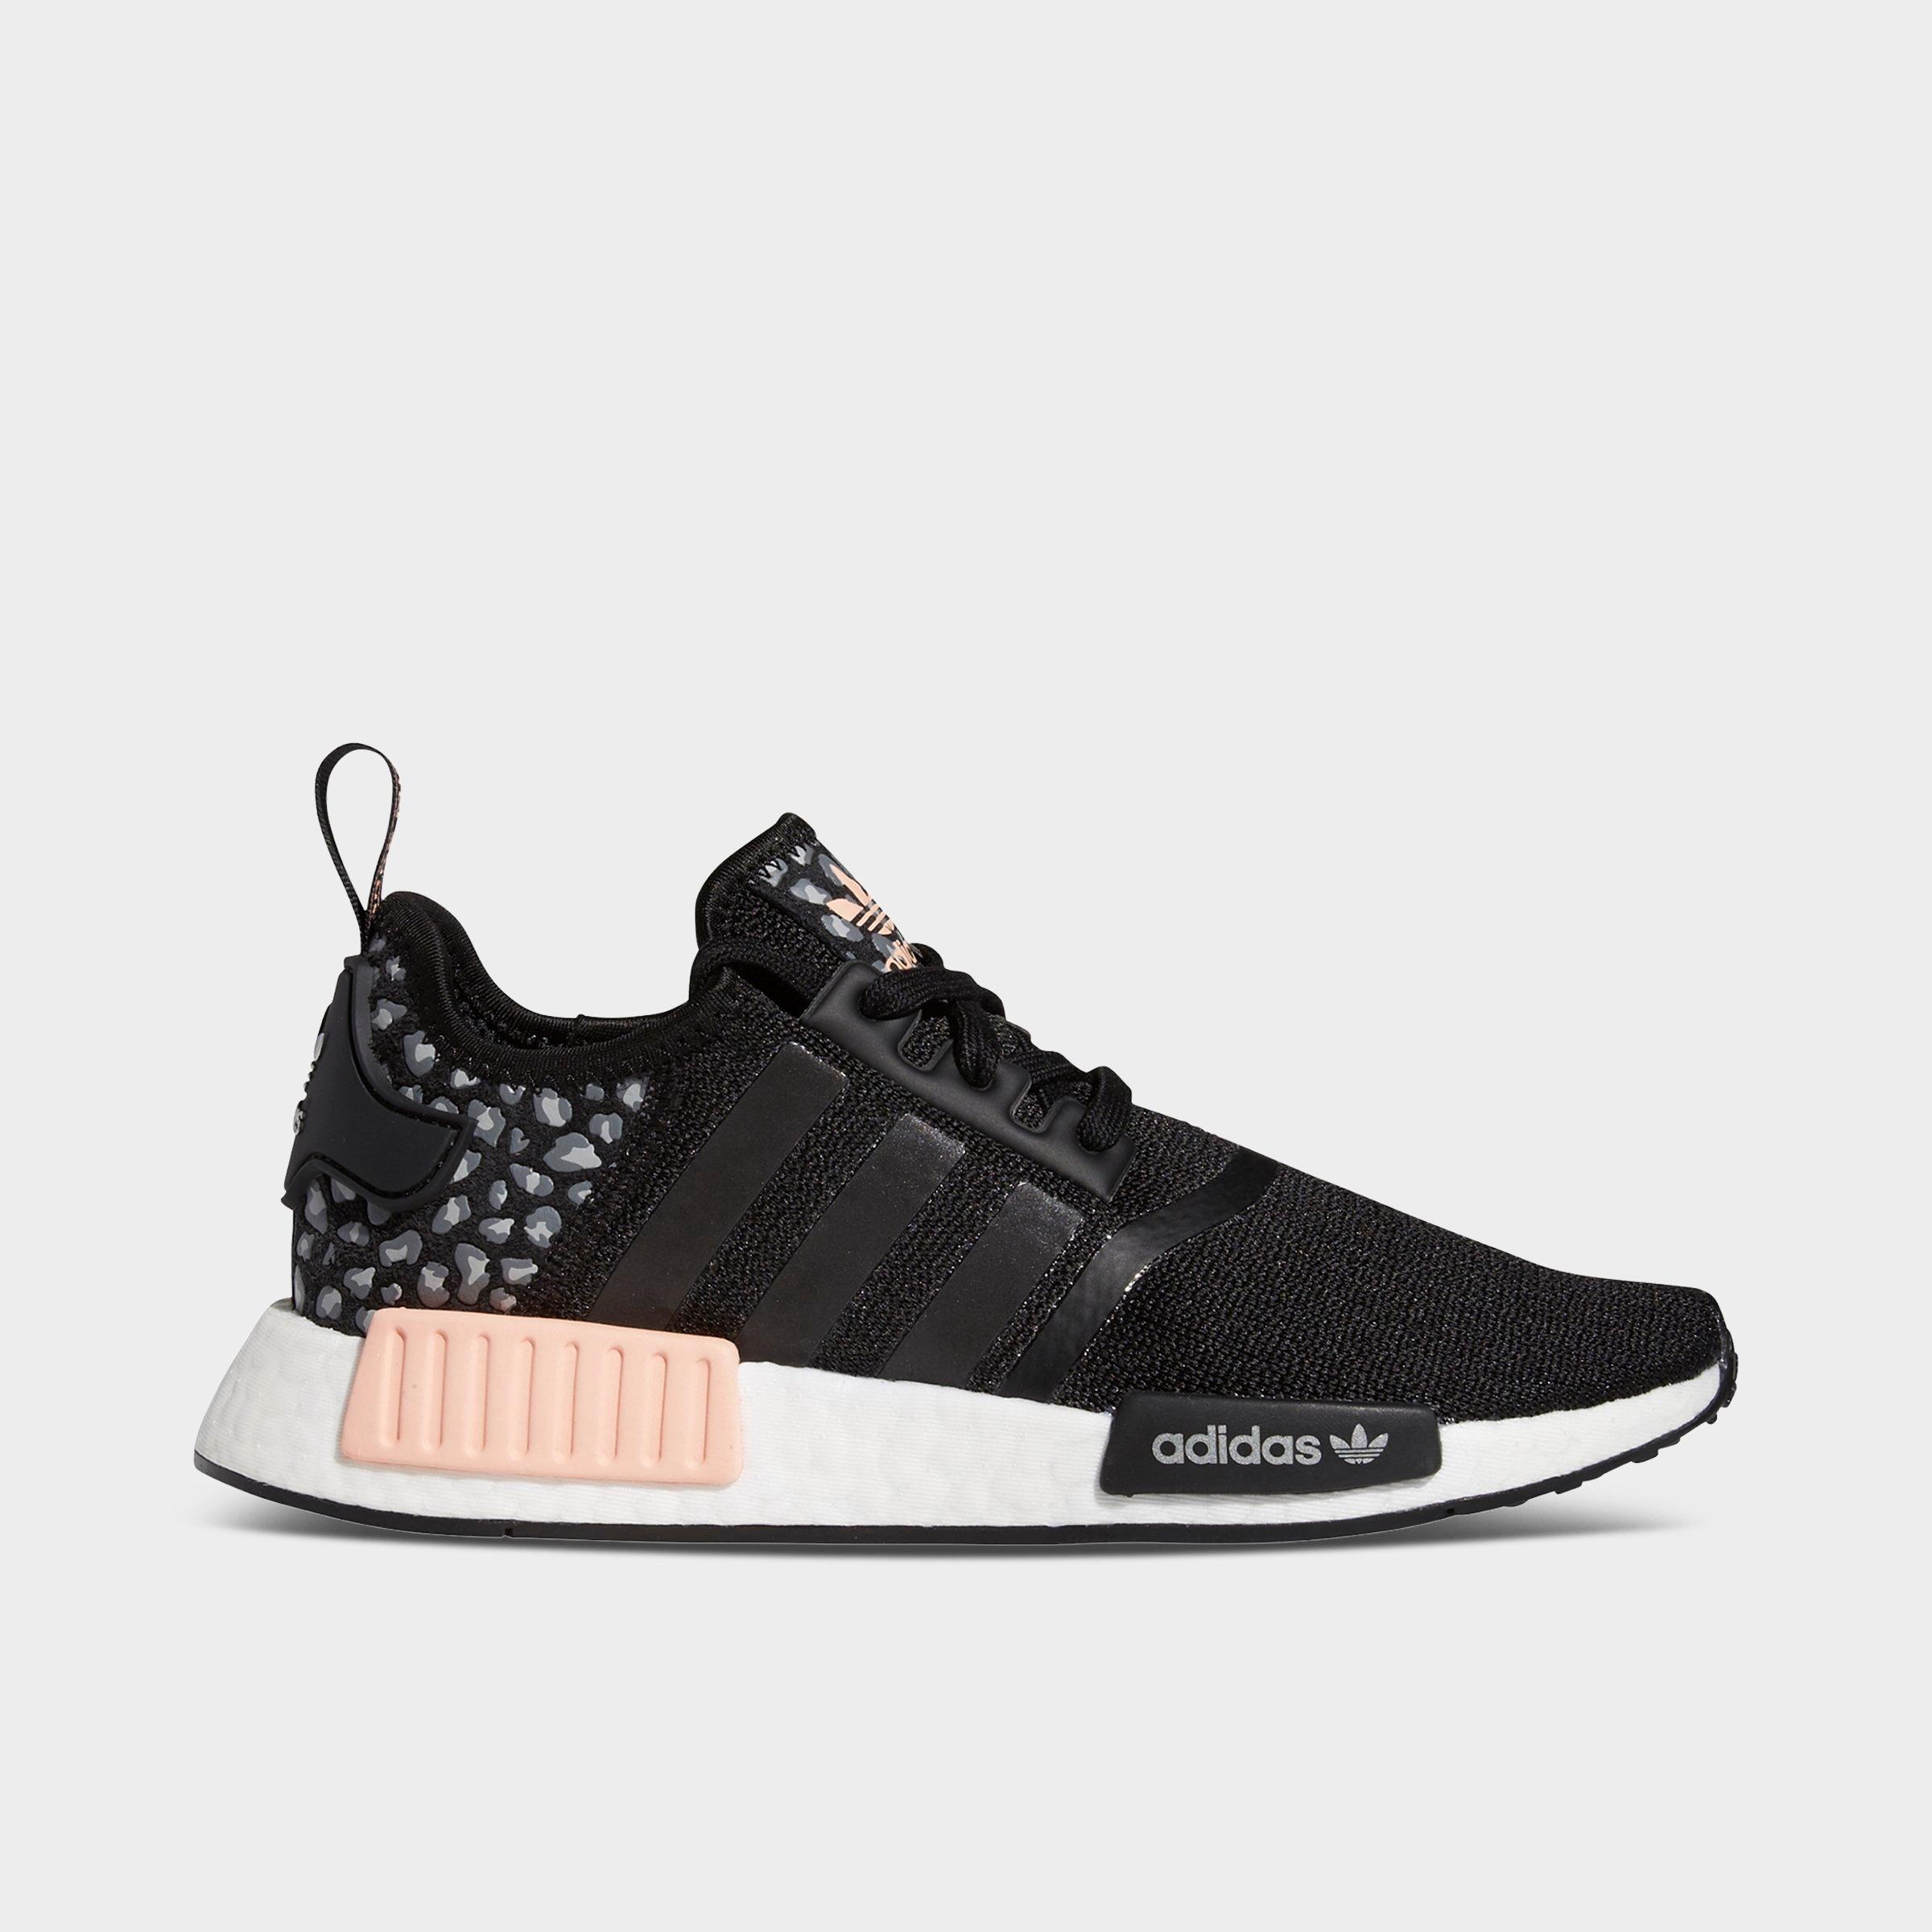 adidas Shoes, Clothing \u0026 Accessories | Boost, NMD, Stan Smith | Finish Line